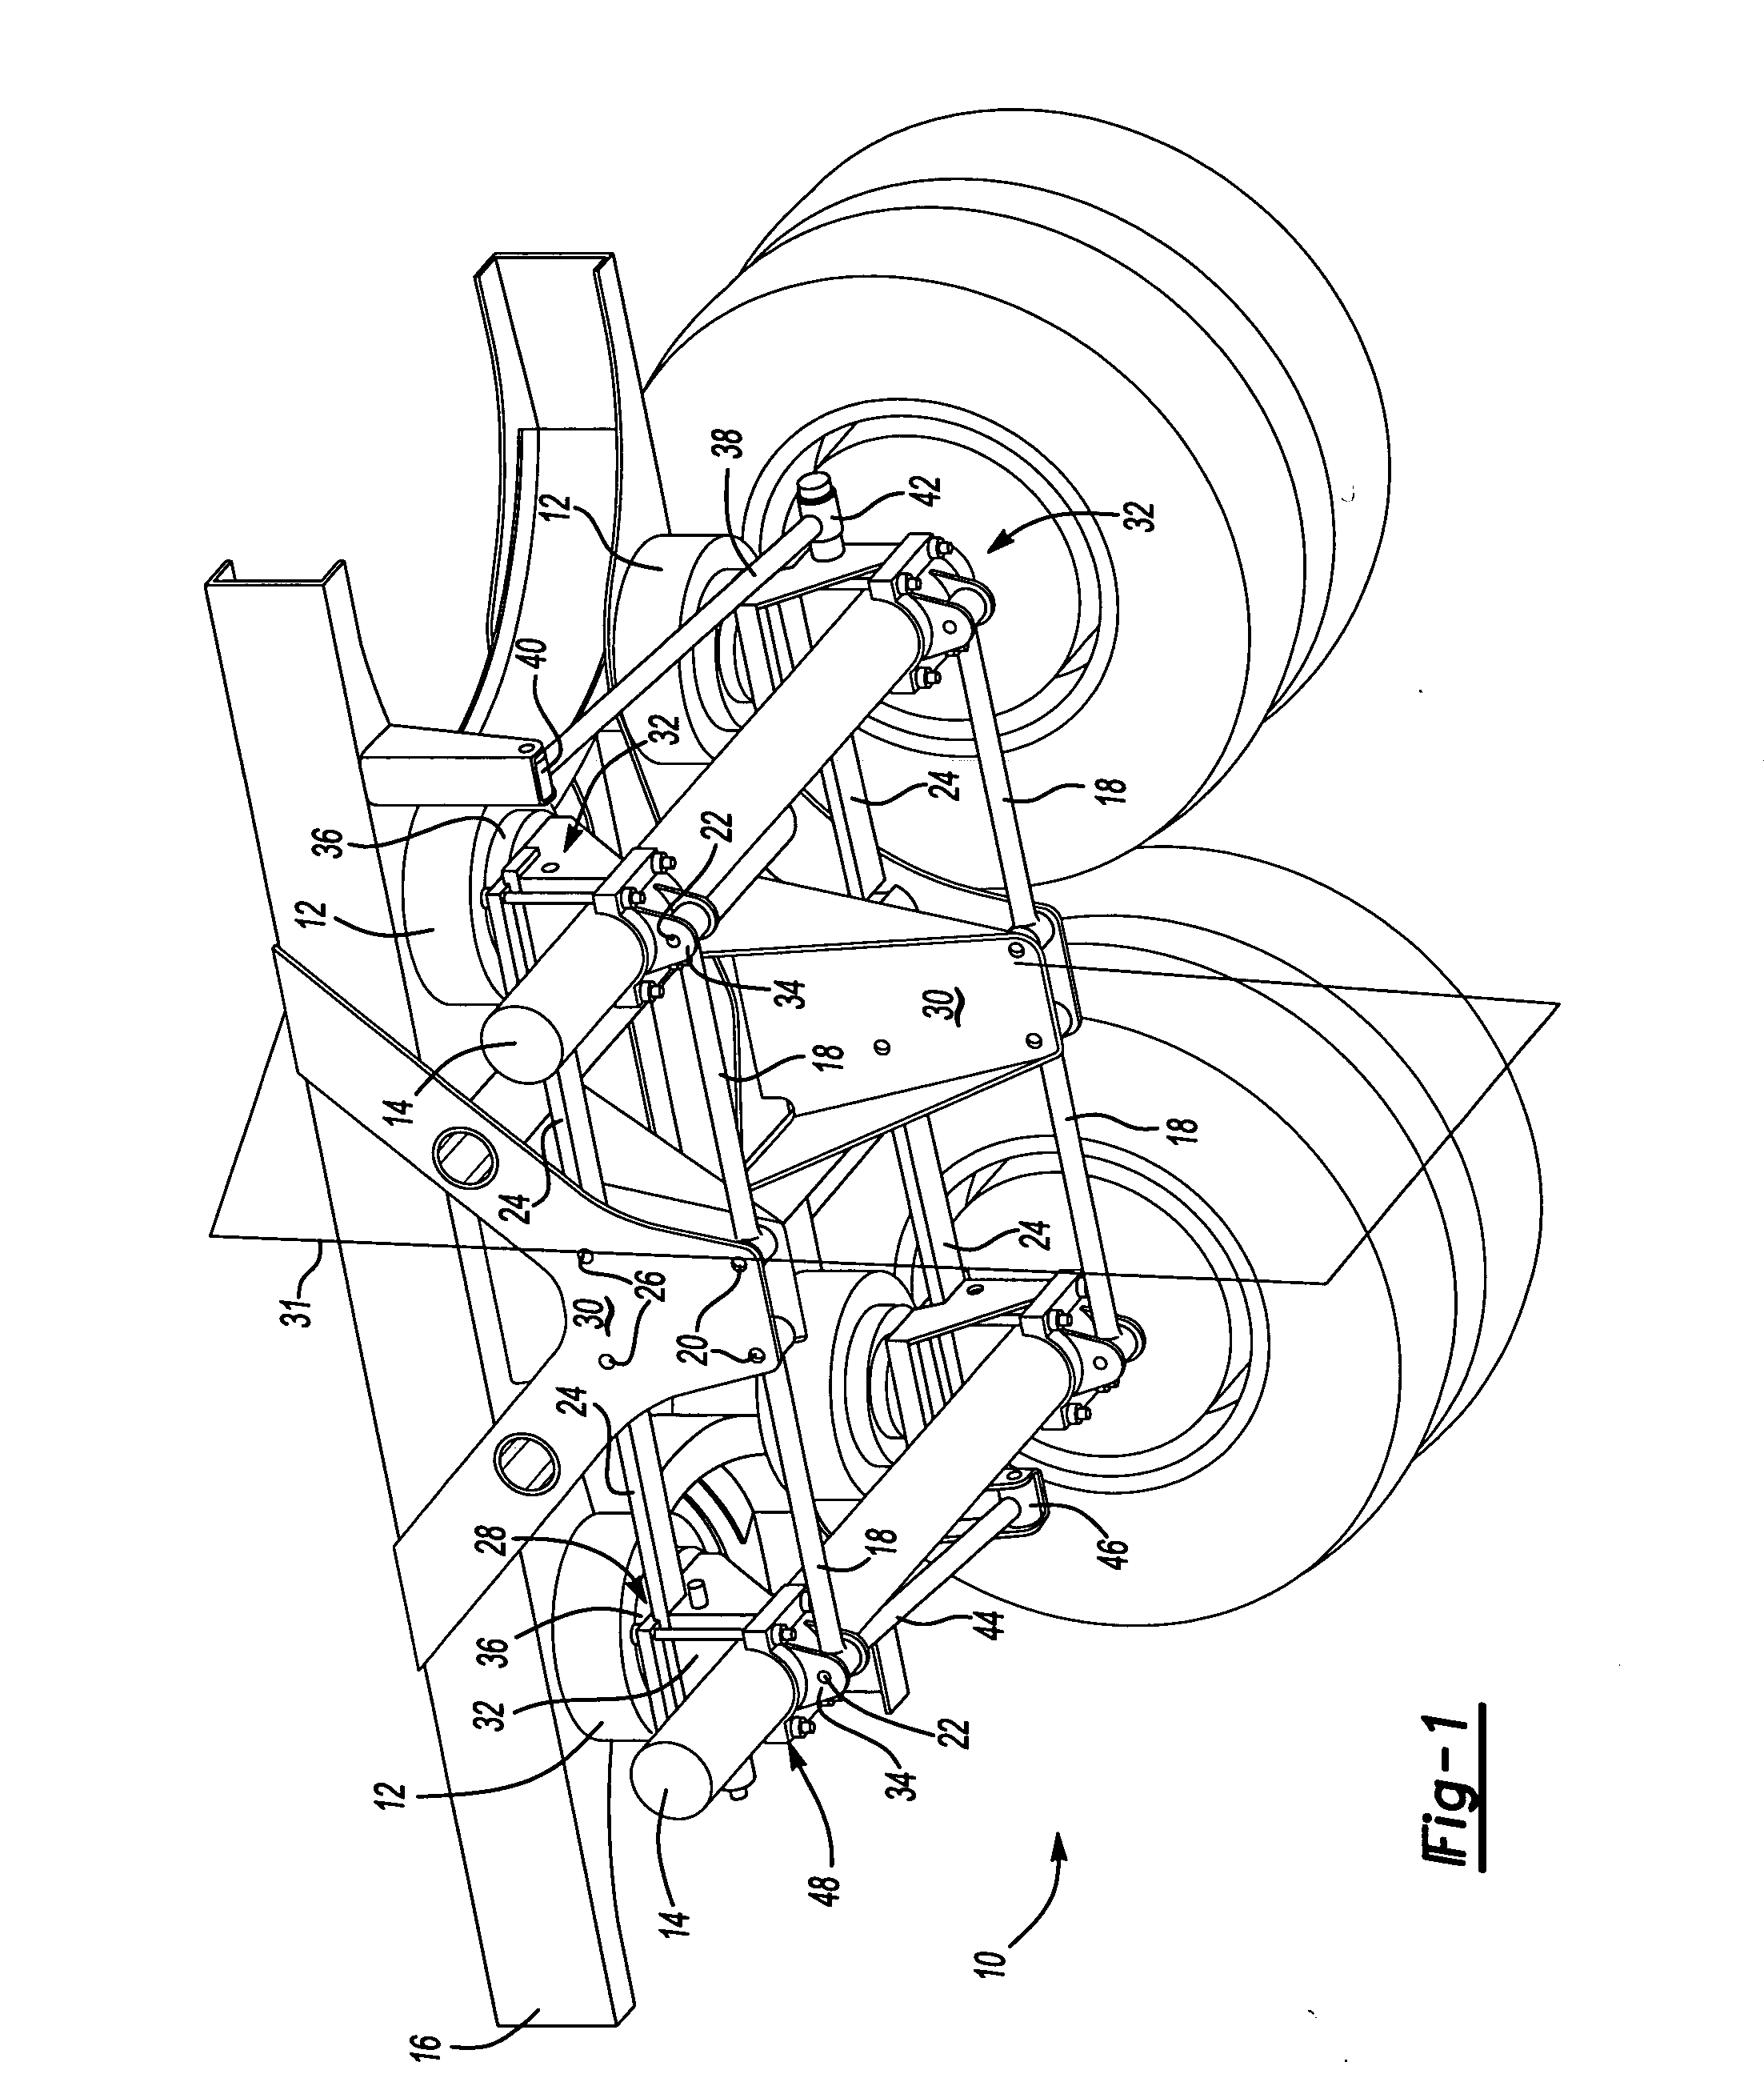 Tandem axle suspension assembly